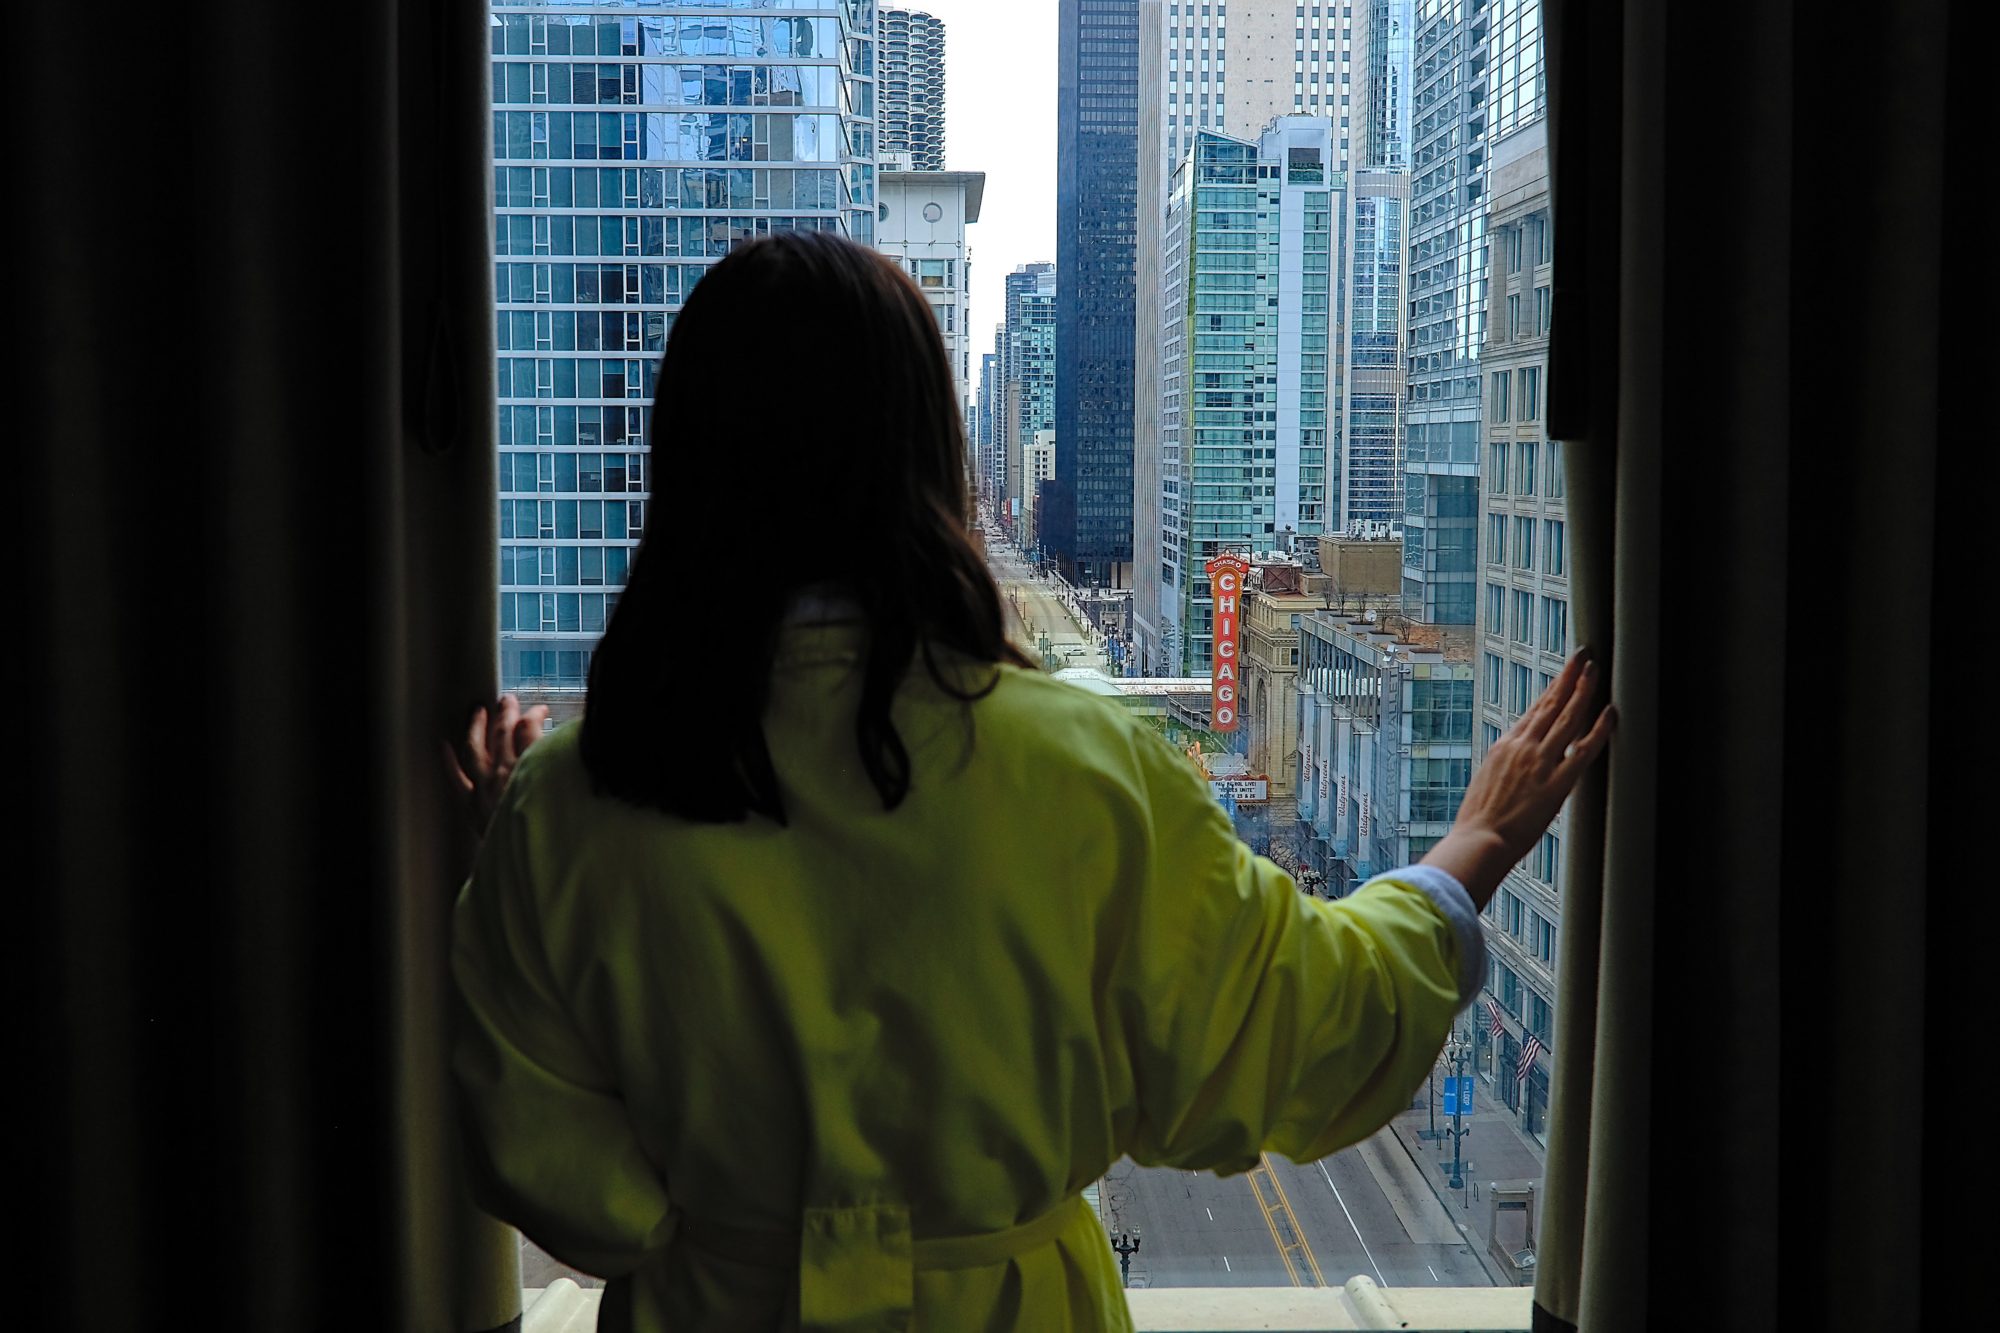 Alyssa looks out the window in a yellow bathrobe